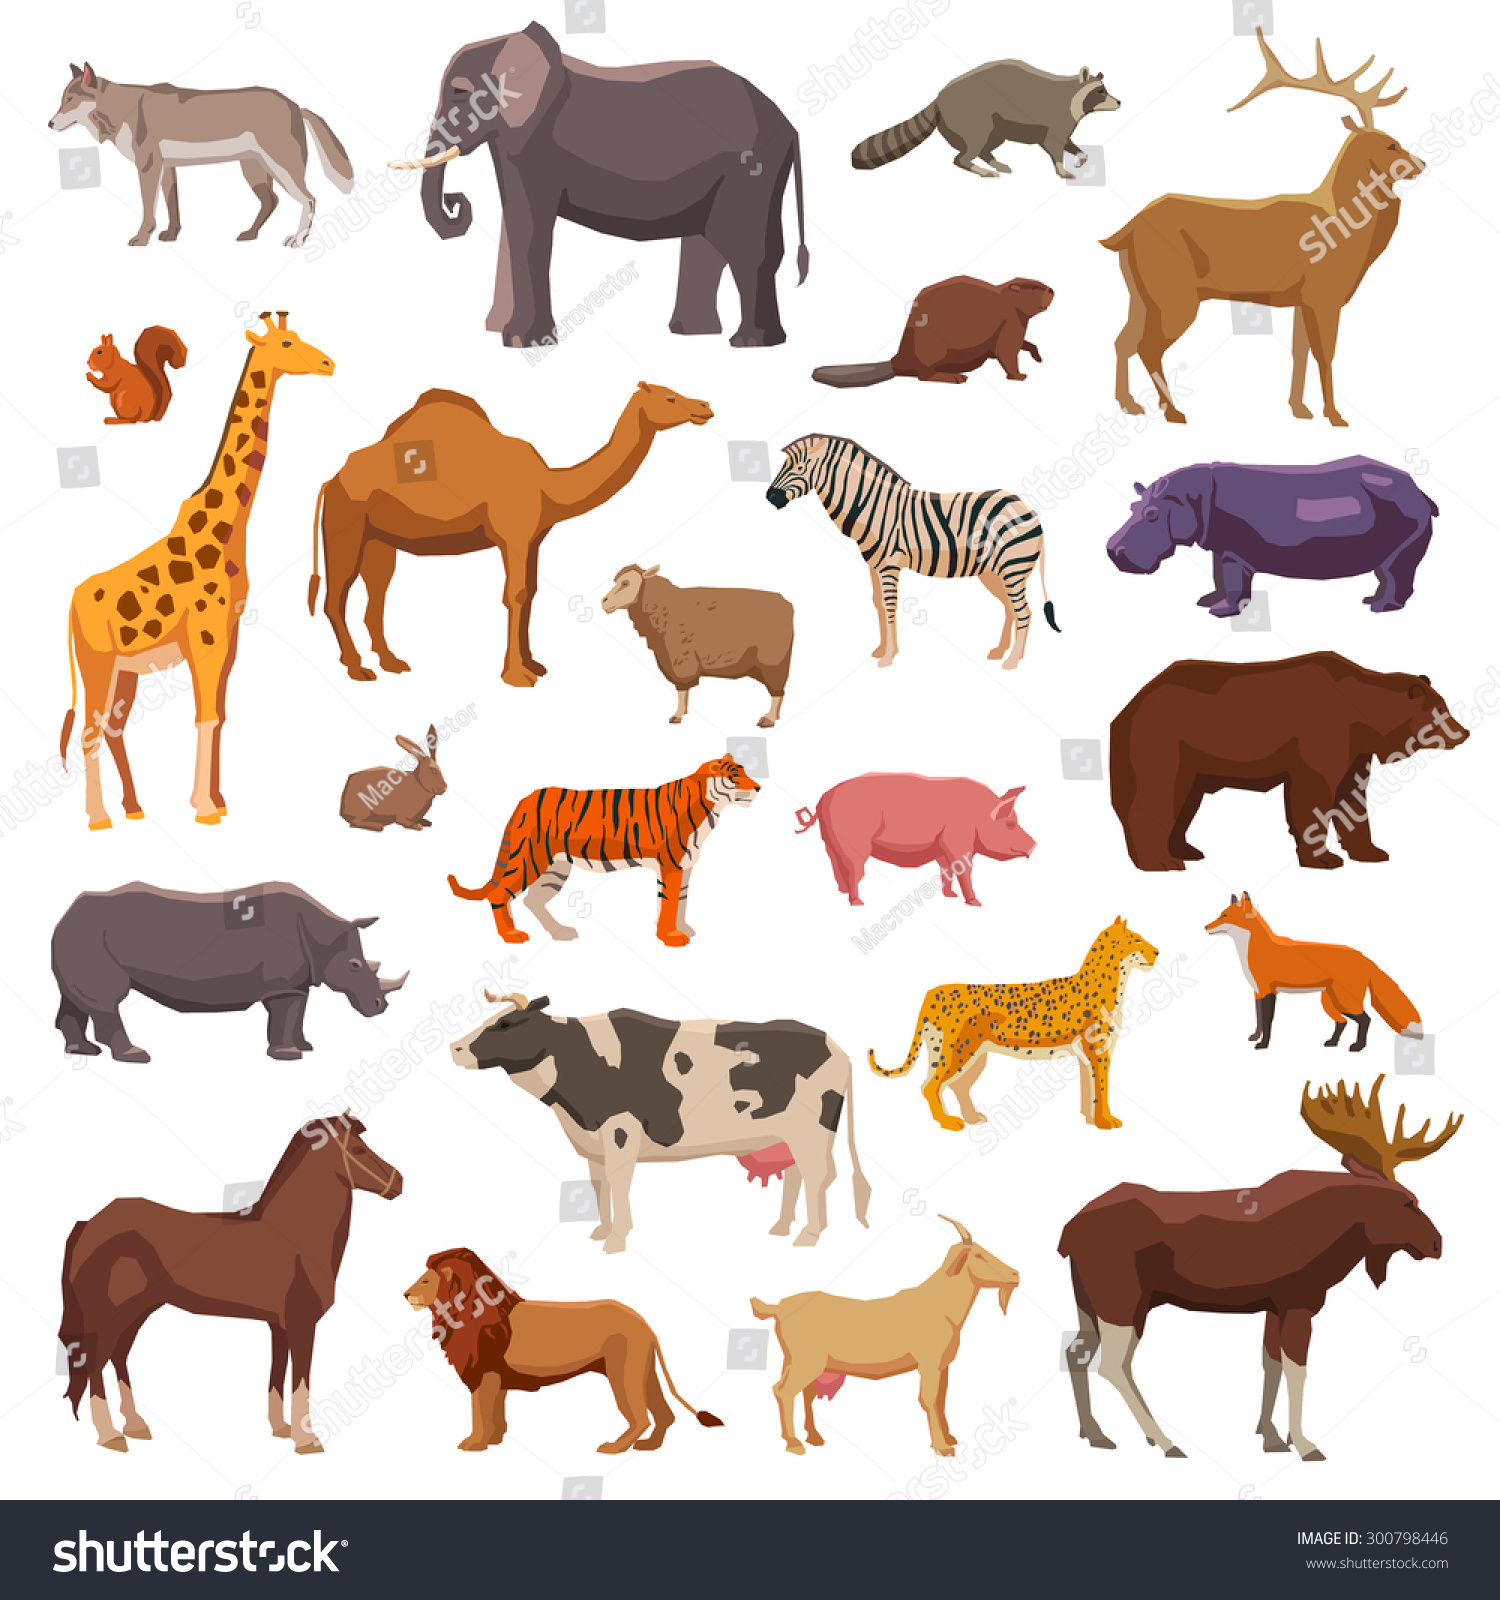 clipart images of domestic animals - photo #29